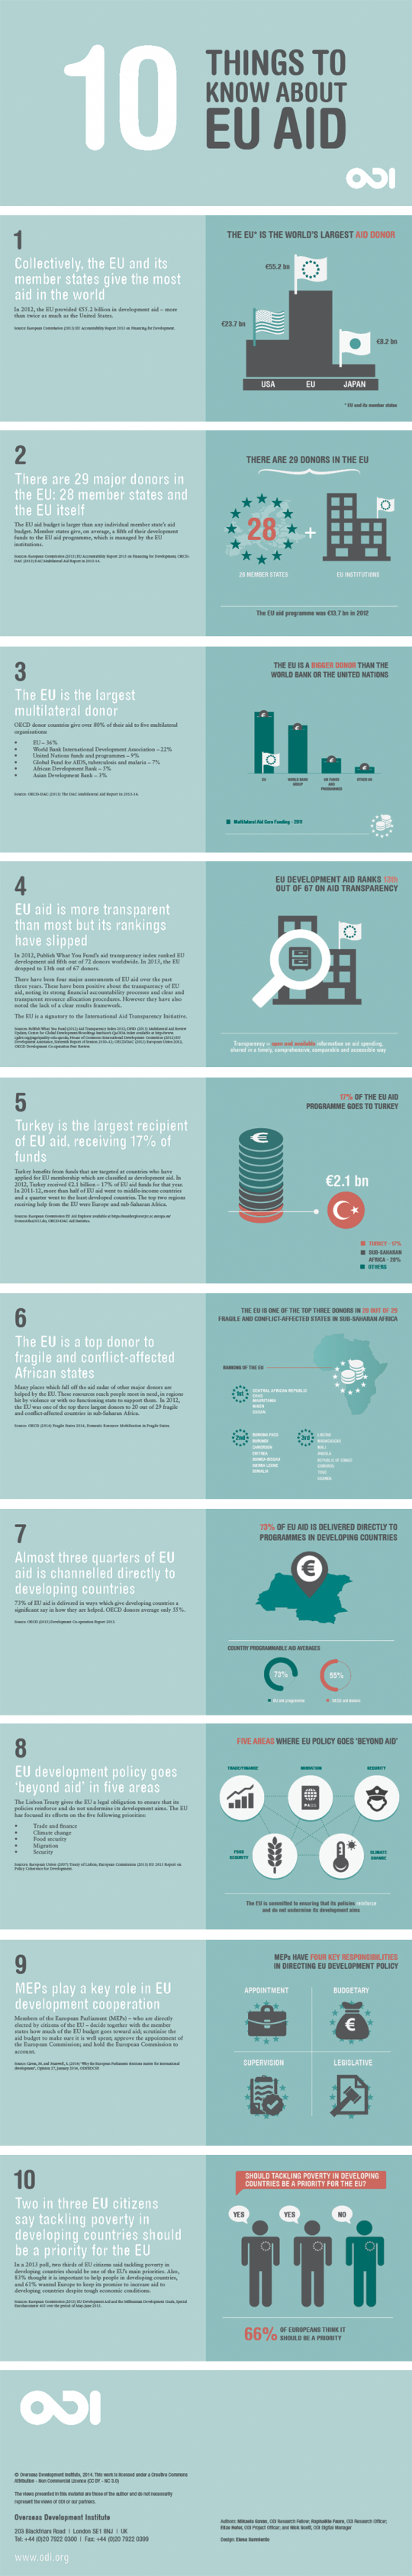 10 things to know about EU aid